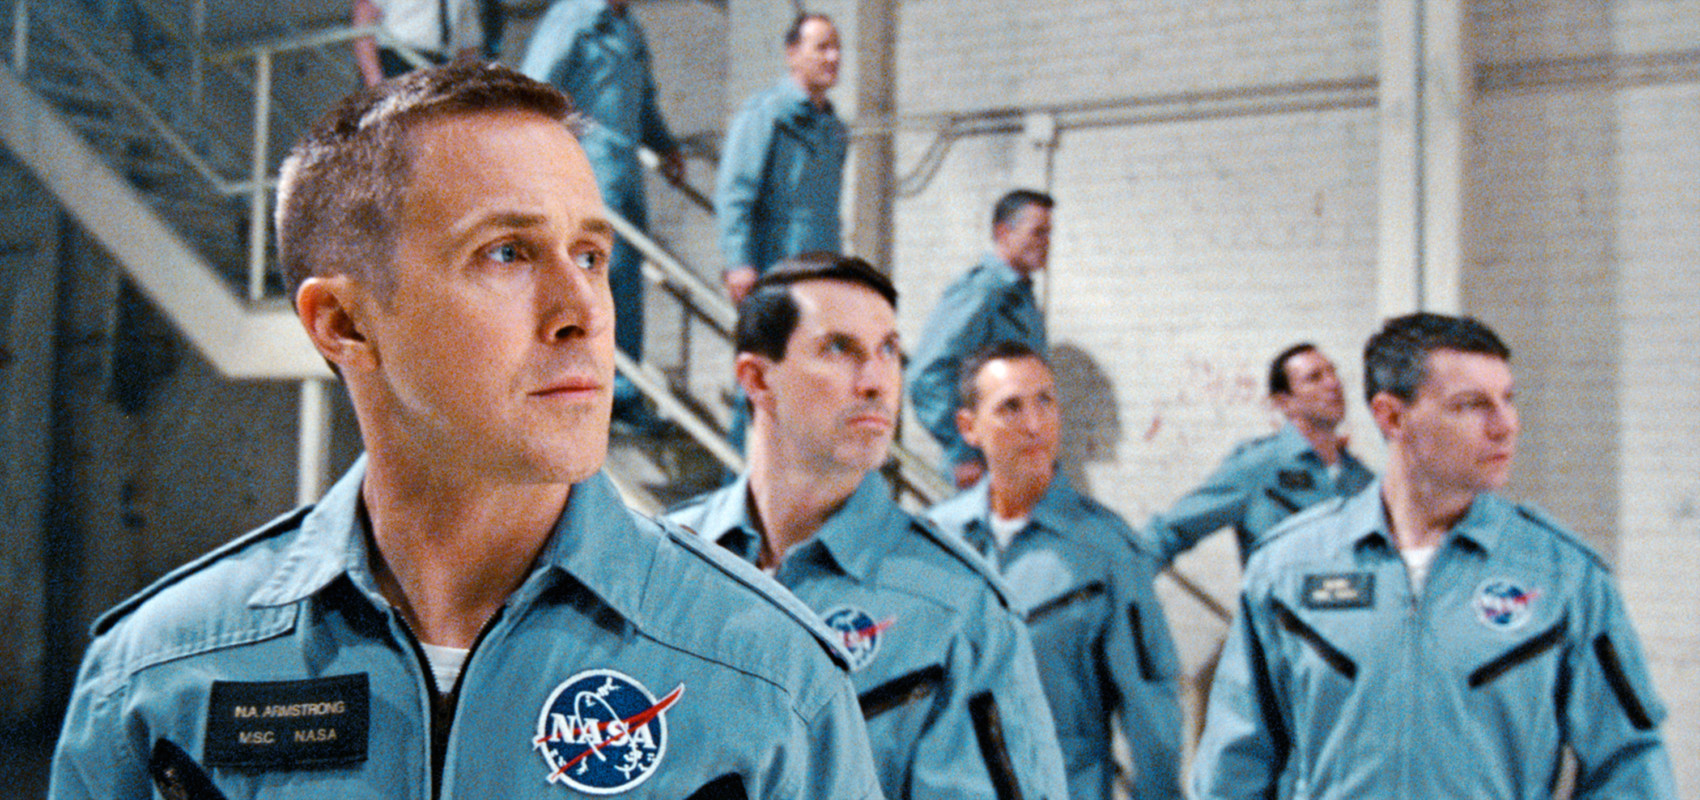 Ryan Gosling’s upcoming film First Man about Neil Armstrong